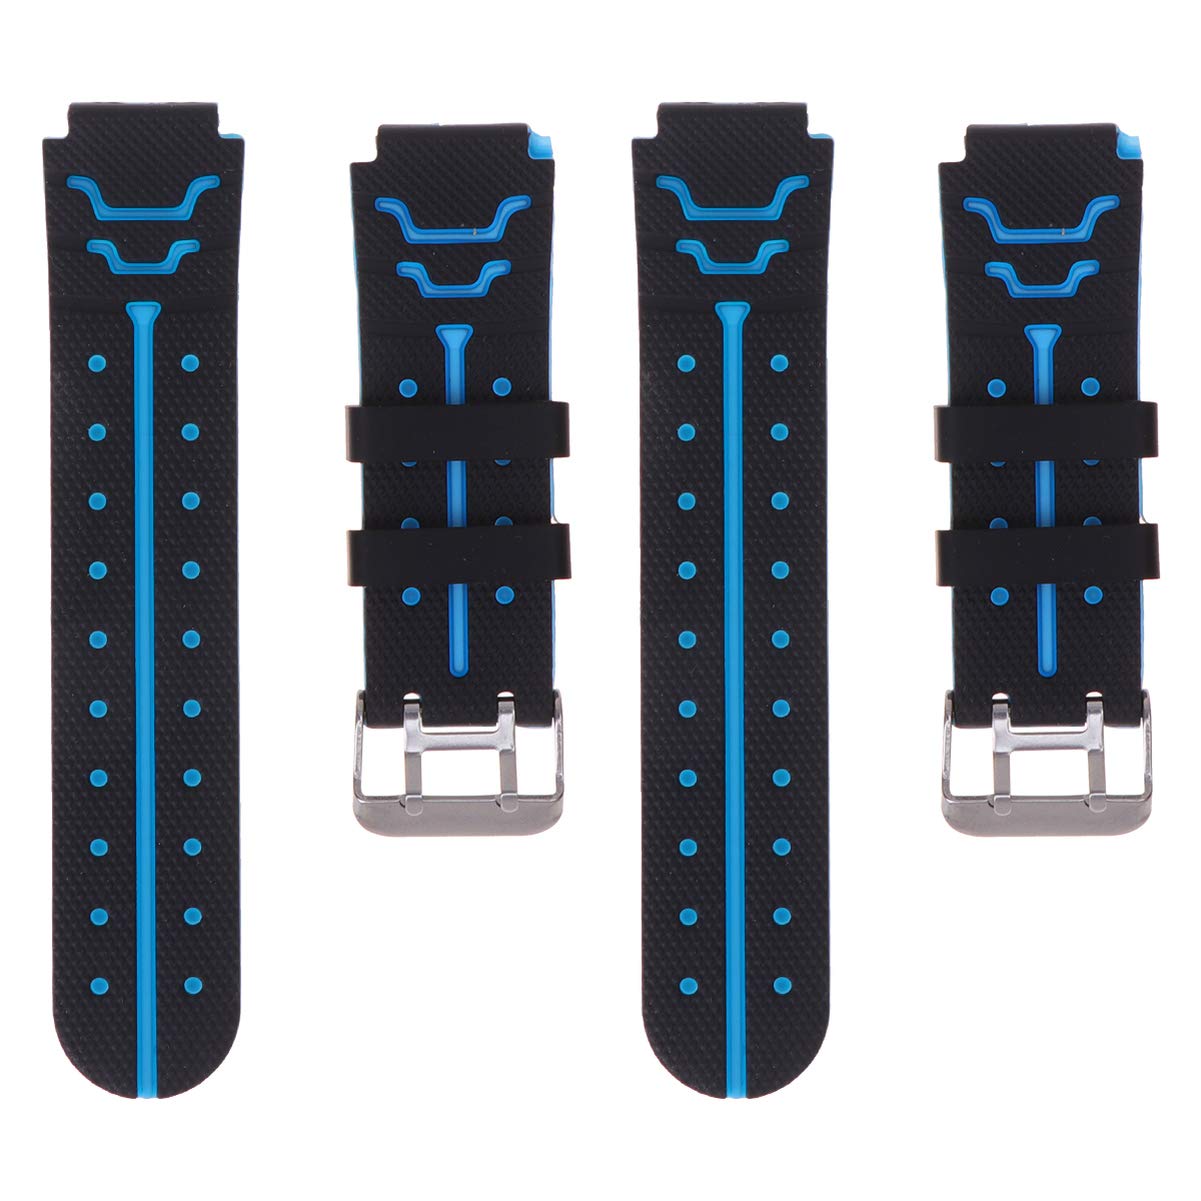 NICERIO 2Pcs Watch Band - Fourth Generation Kids Watches Strap Wristband Replacement Strap Comfortable Strap Watch Accessories for Children Kid Wristwatch, Black and Blue